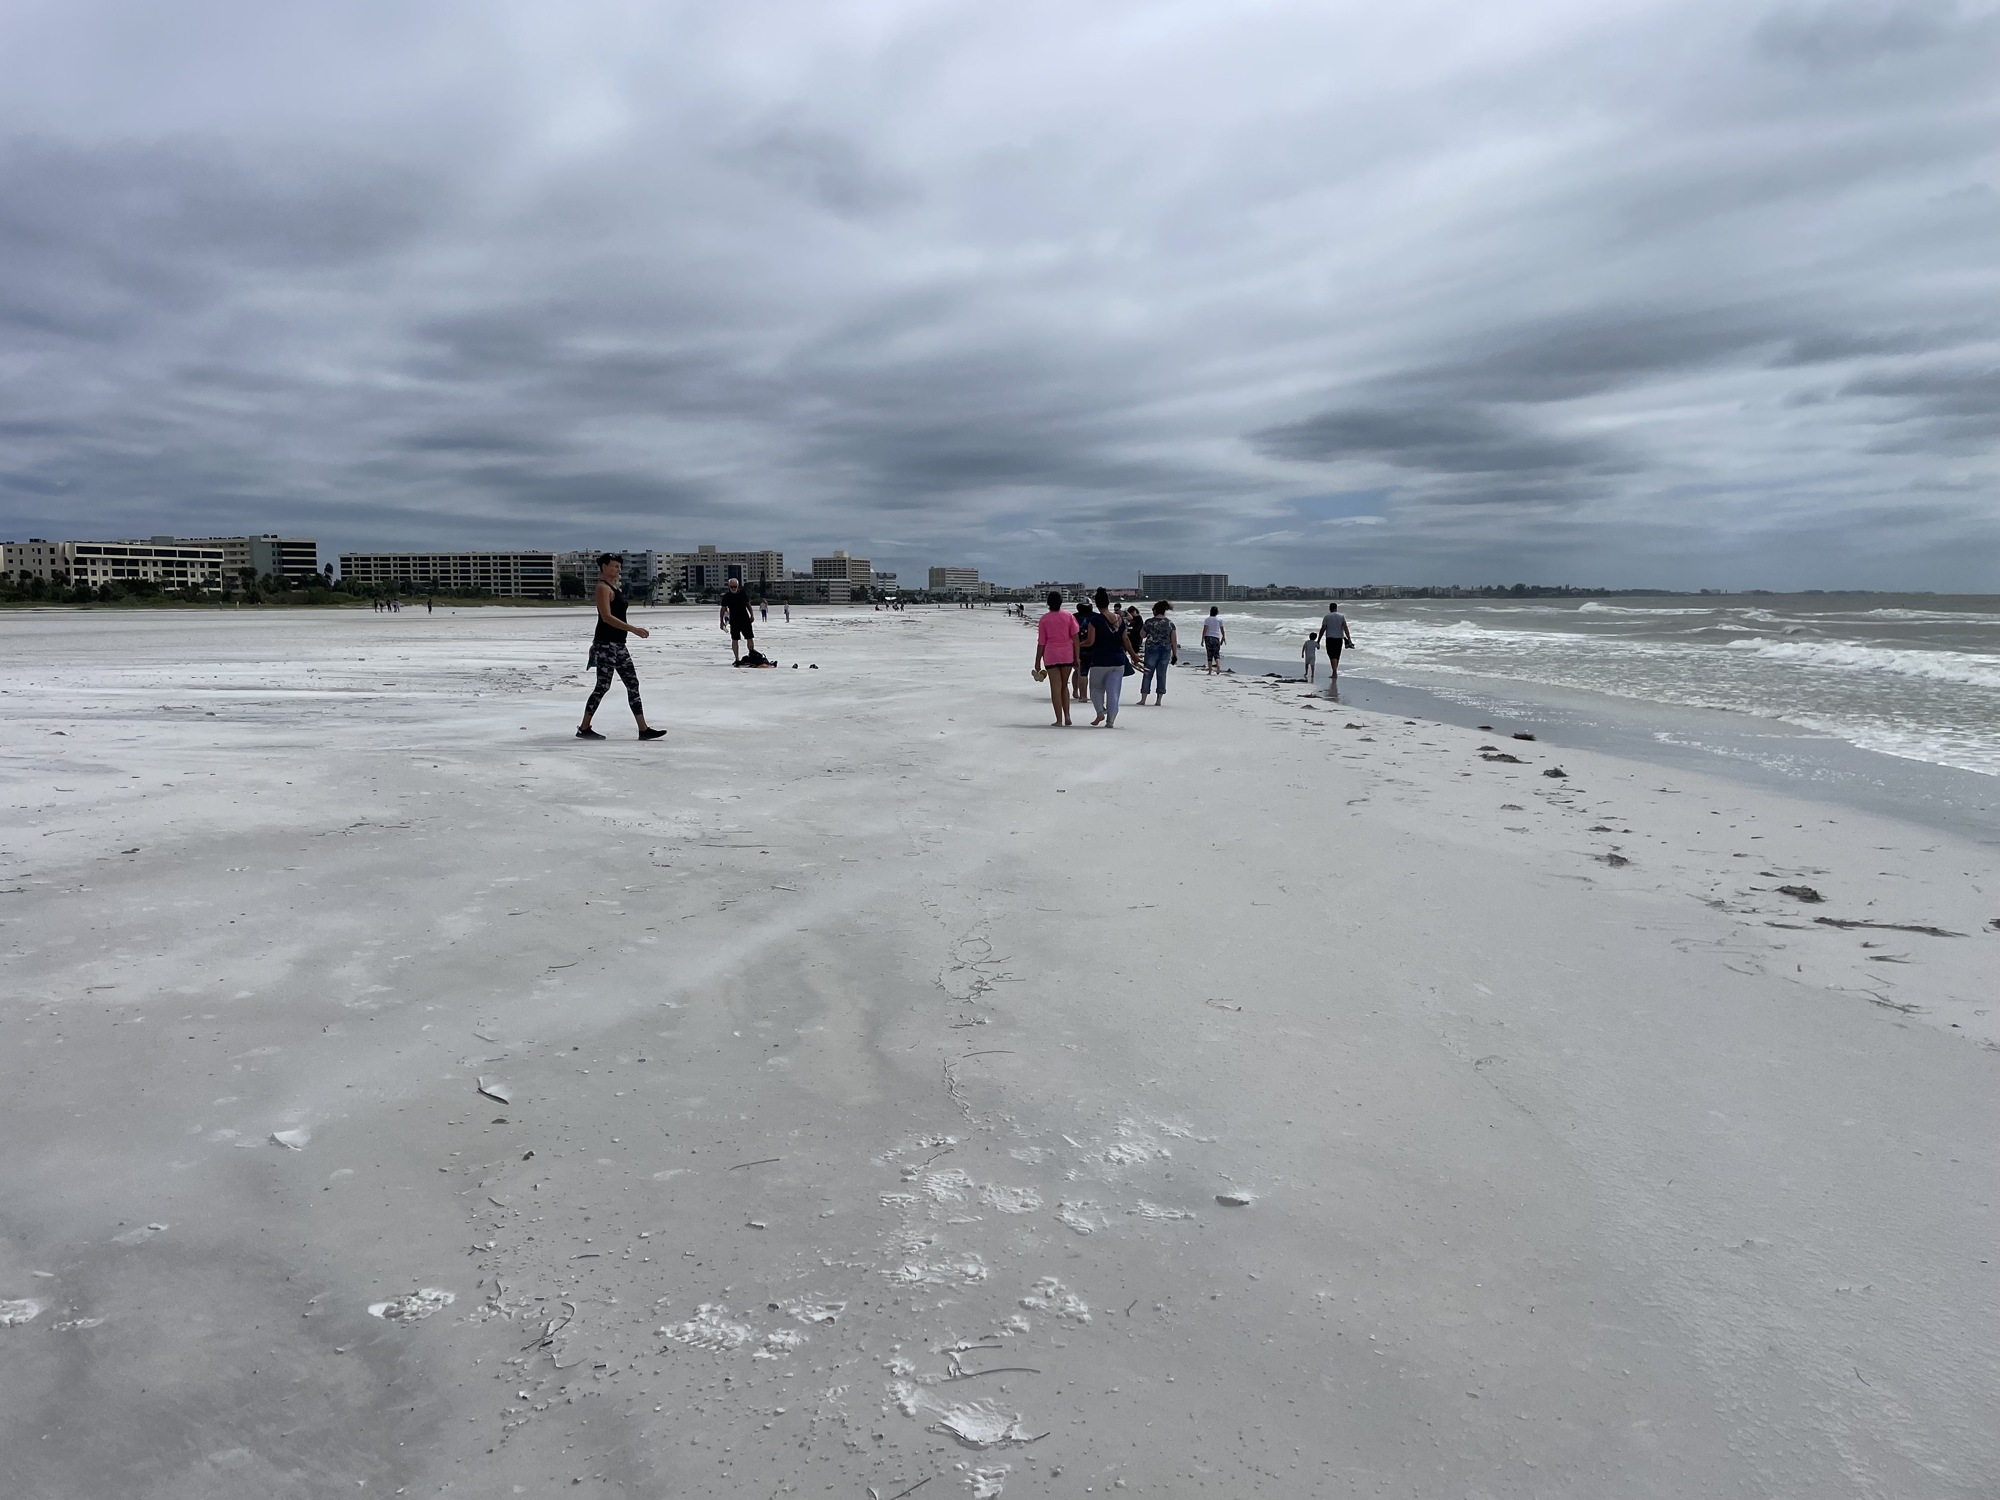 Minor damage was seen early afternoon Thursday on Siesta Beach as some residents walked the beach. (Photo by Ryan Kohn)